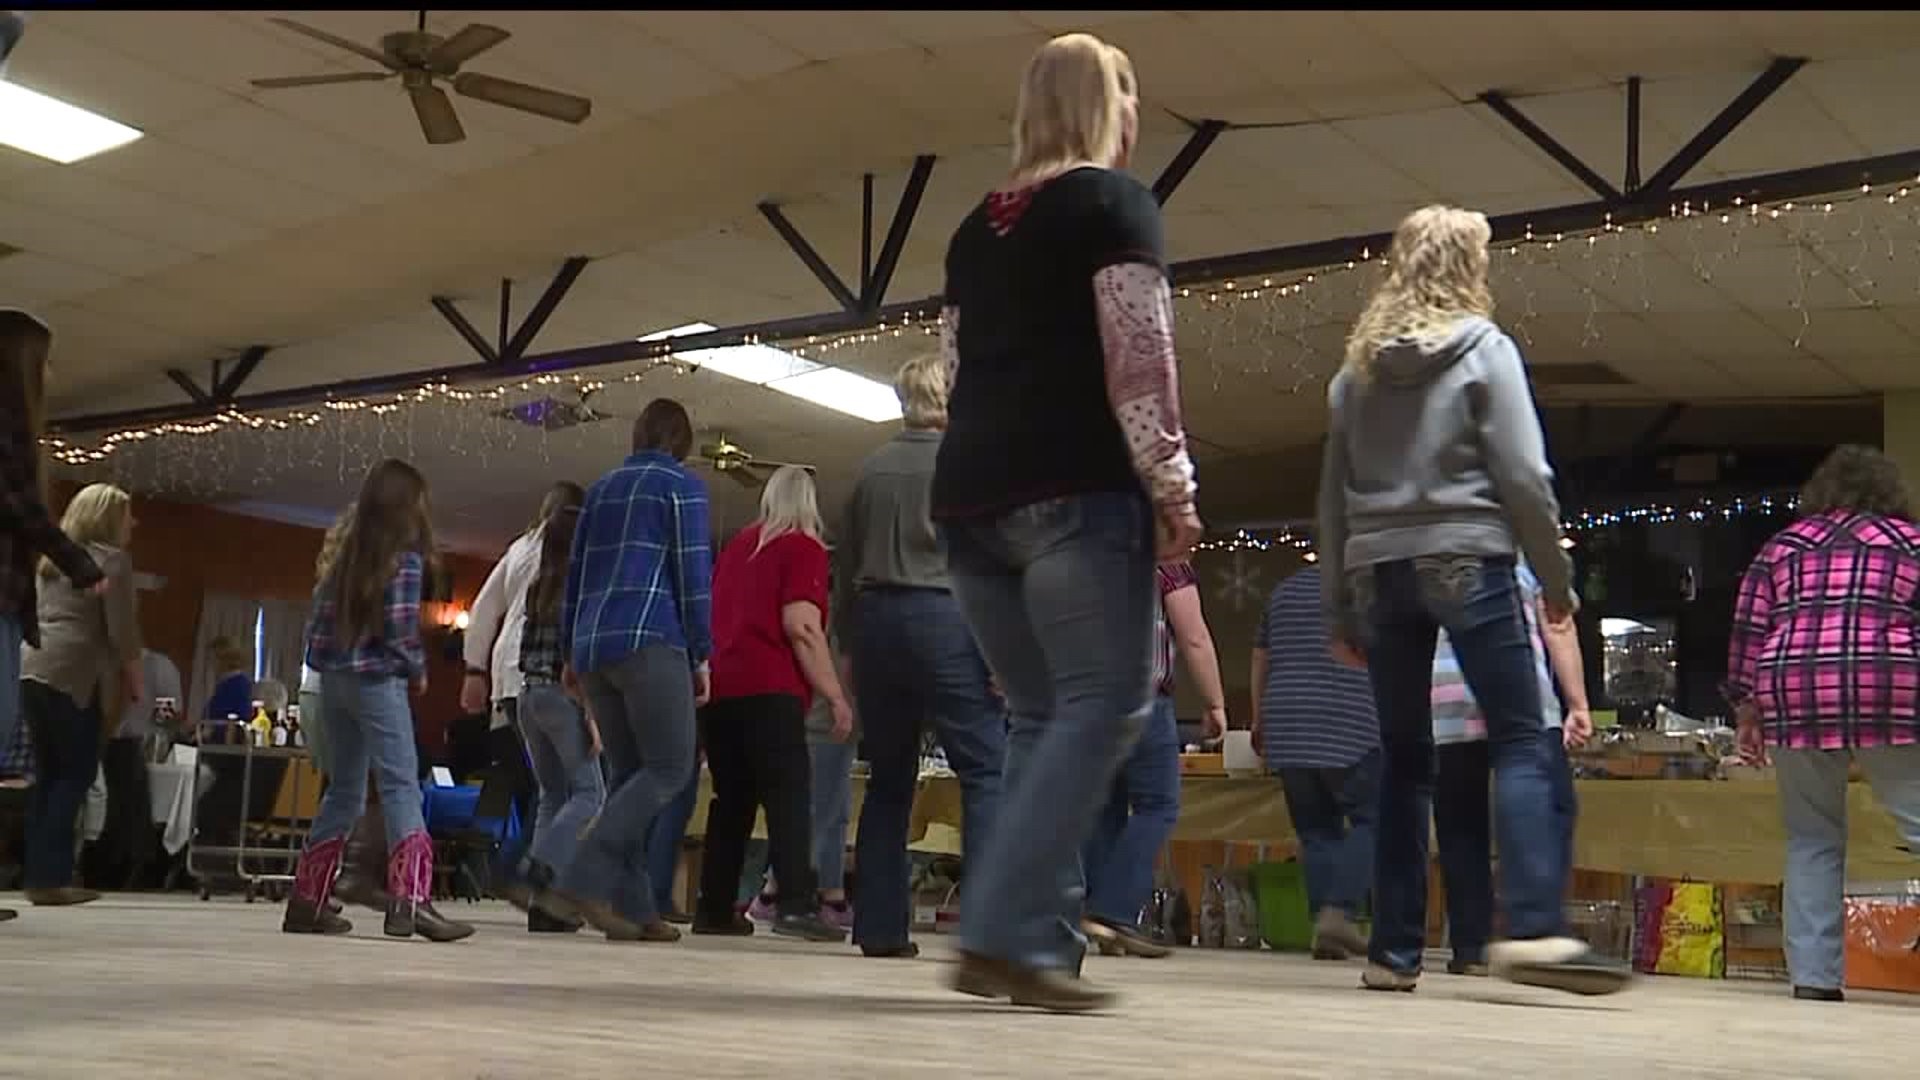 Dance and fundraiser held to benefit local farmer and his family